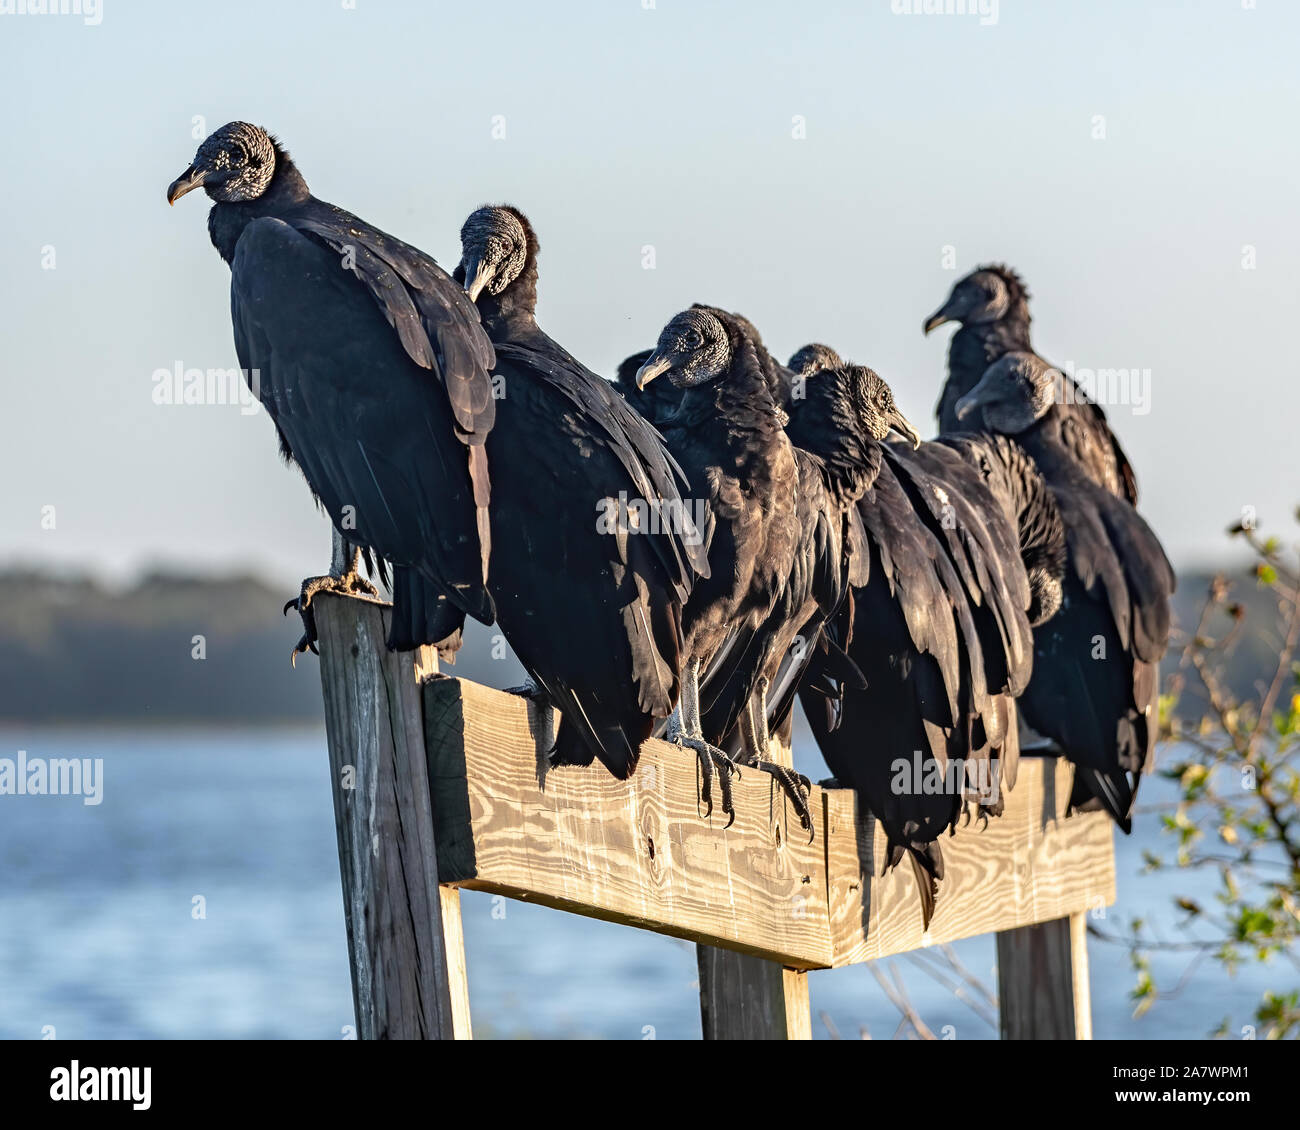 Black vultures perched on a fence Stock Photo